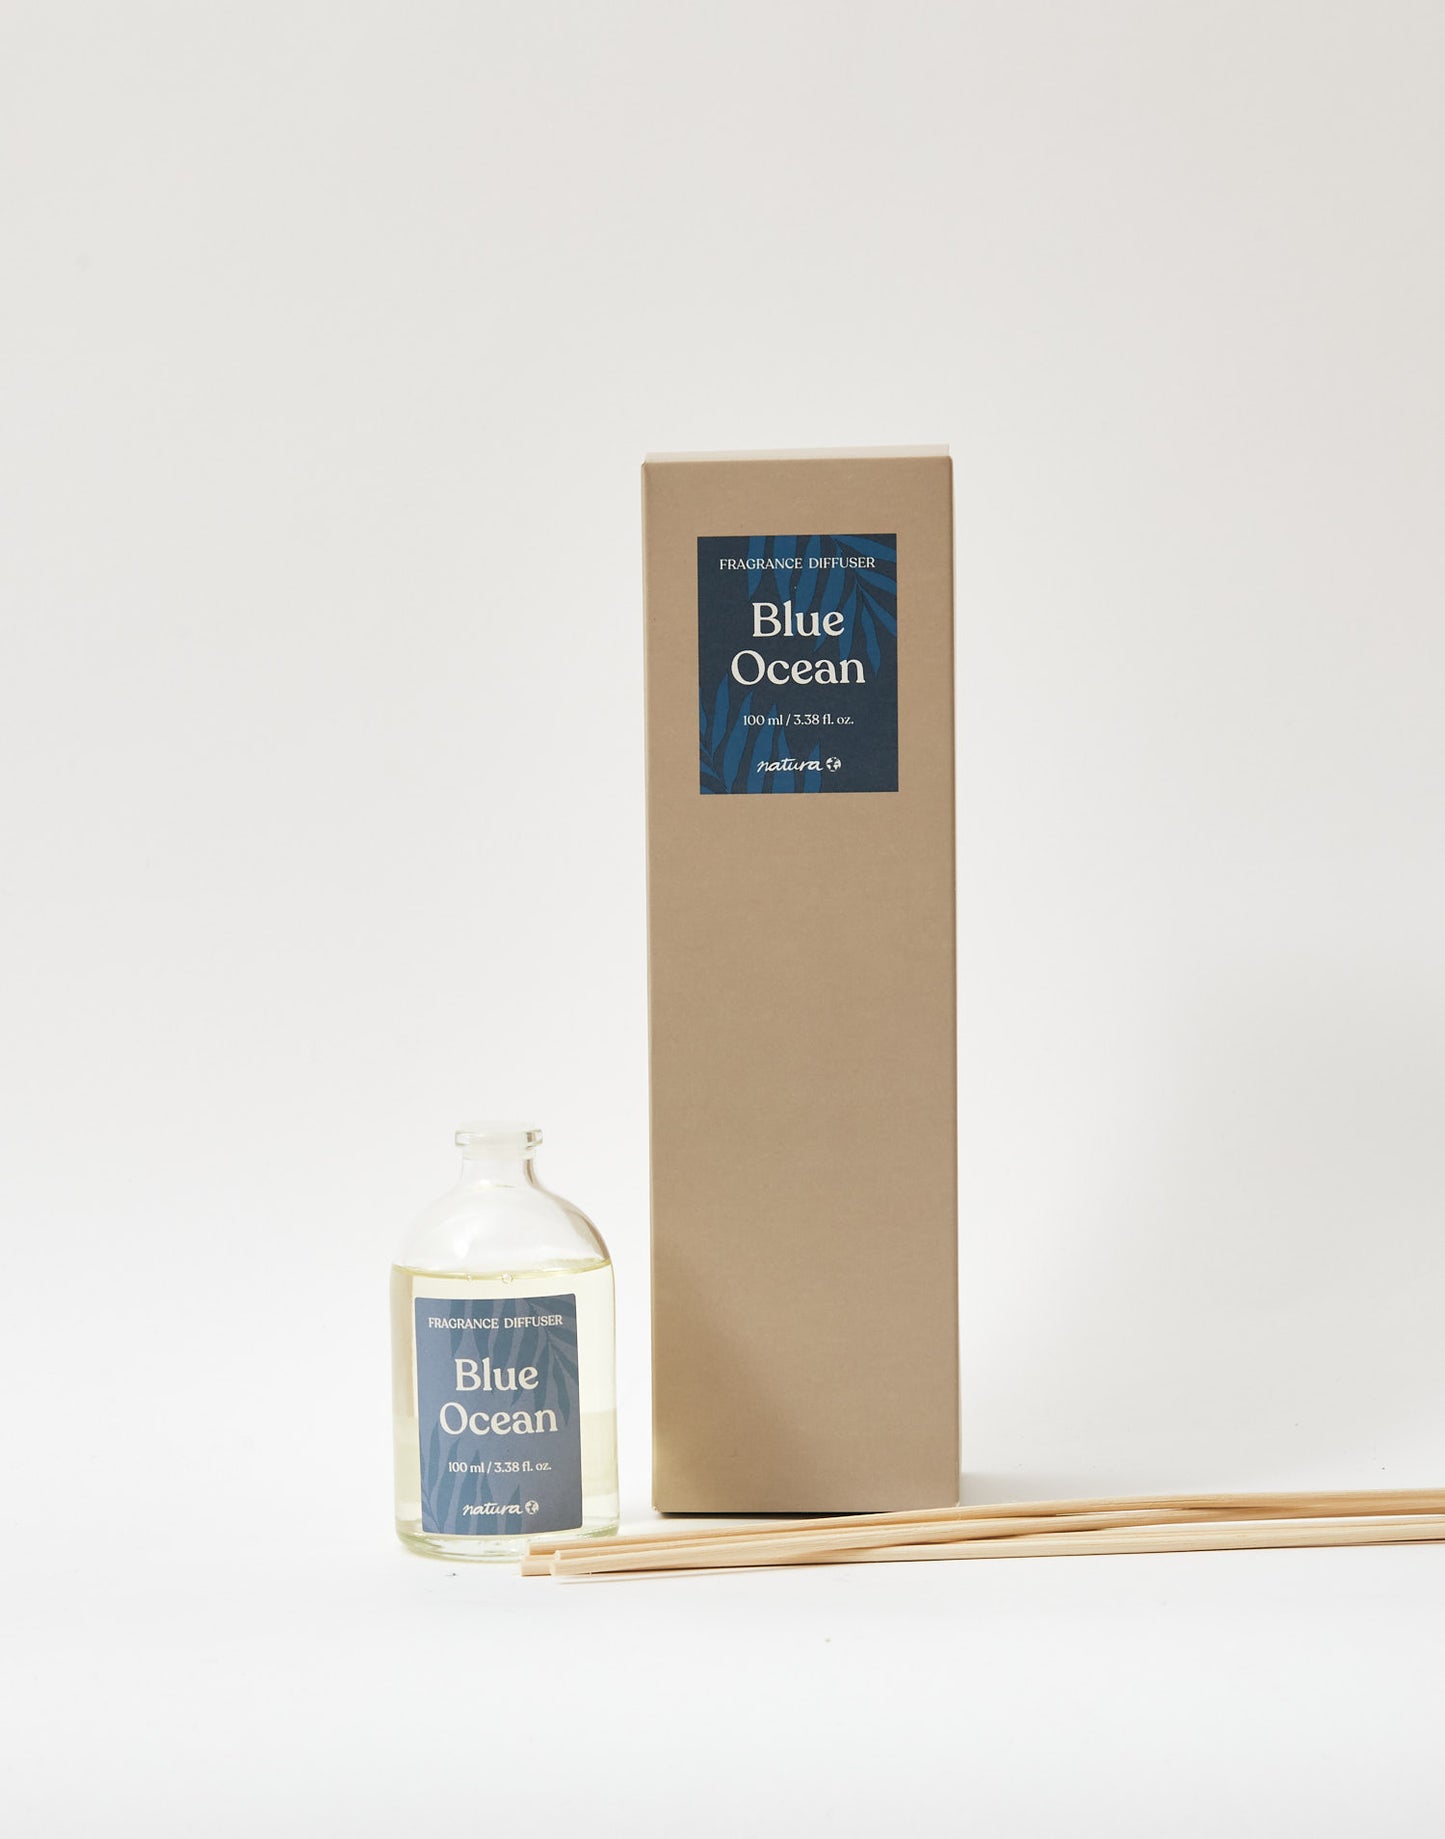 100ml reed diffuser